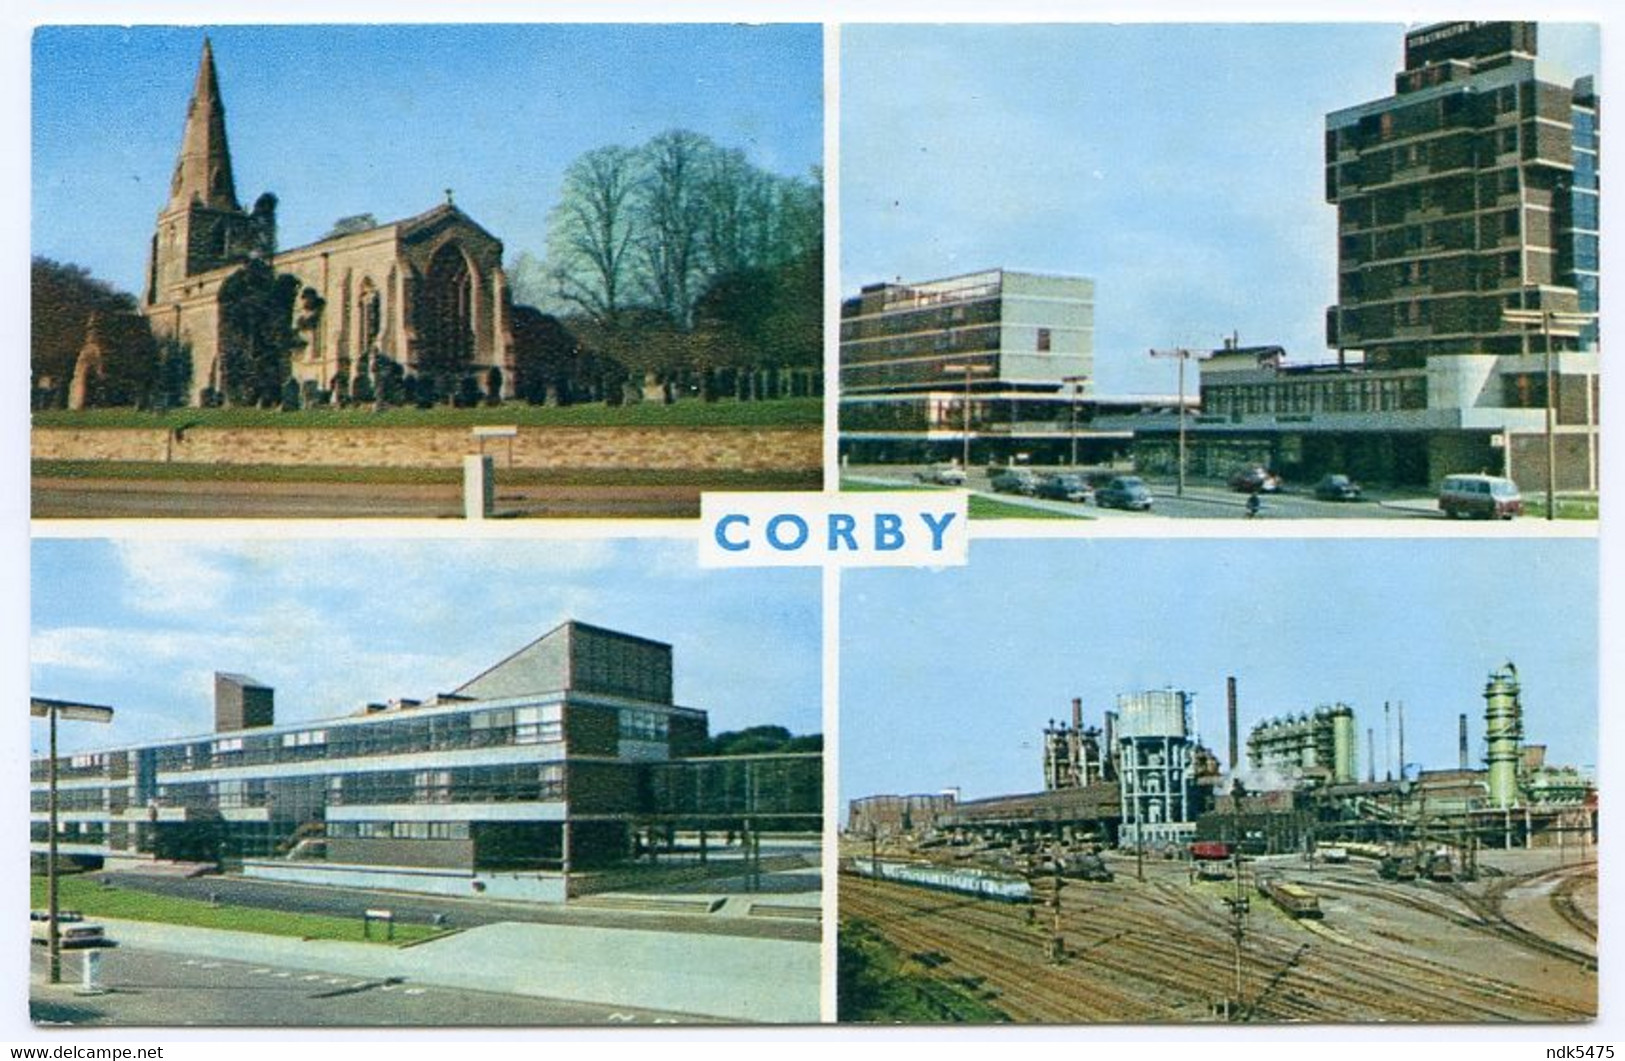 CORBY : MULTIVIEW - STEWARTS & LLOYDS STEELWORKS, CIVIC CENTRE, THE STRATHCLYDE HOTEL, THE PARISH CHURCH - Northamptonshire